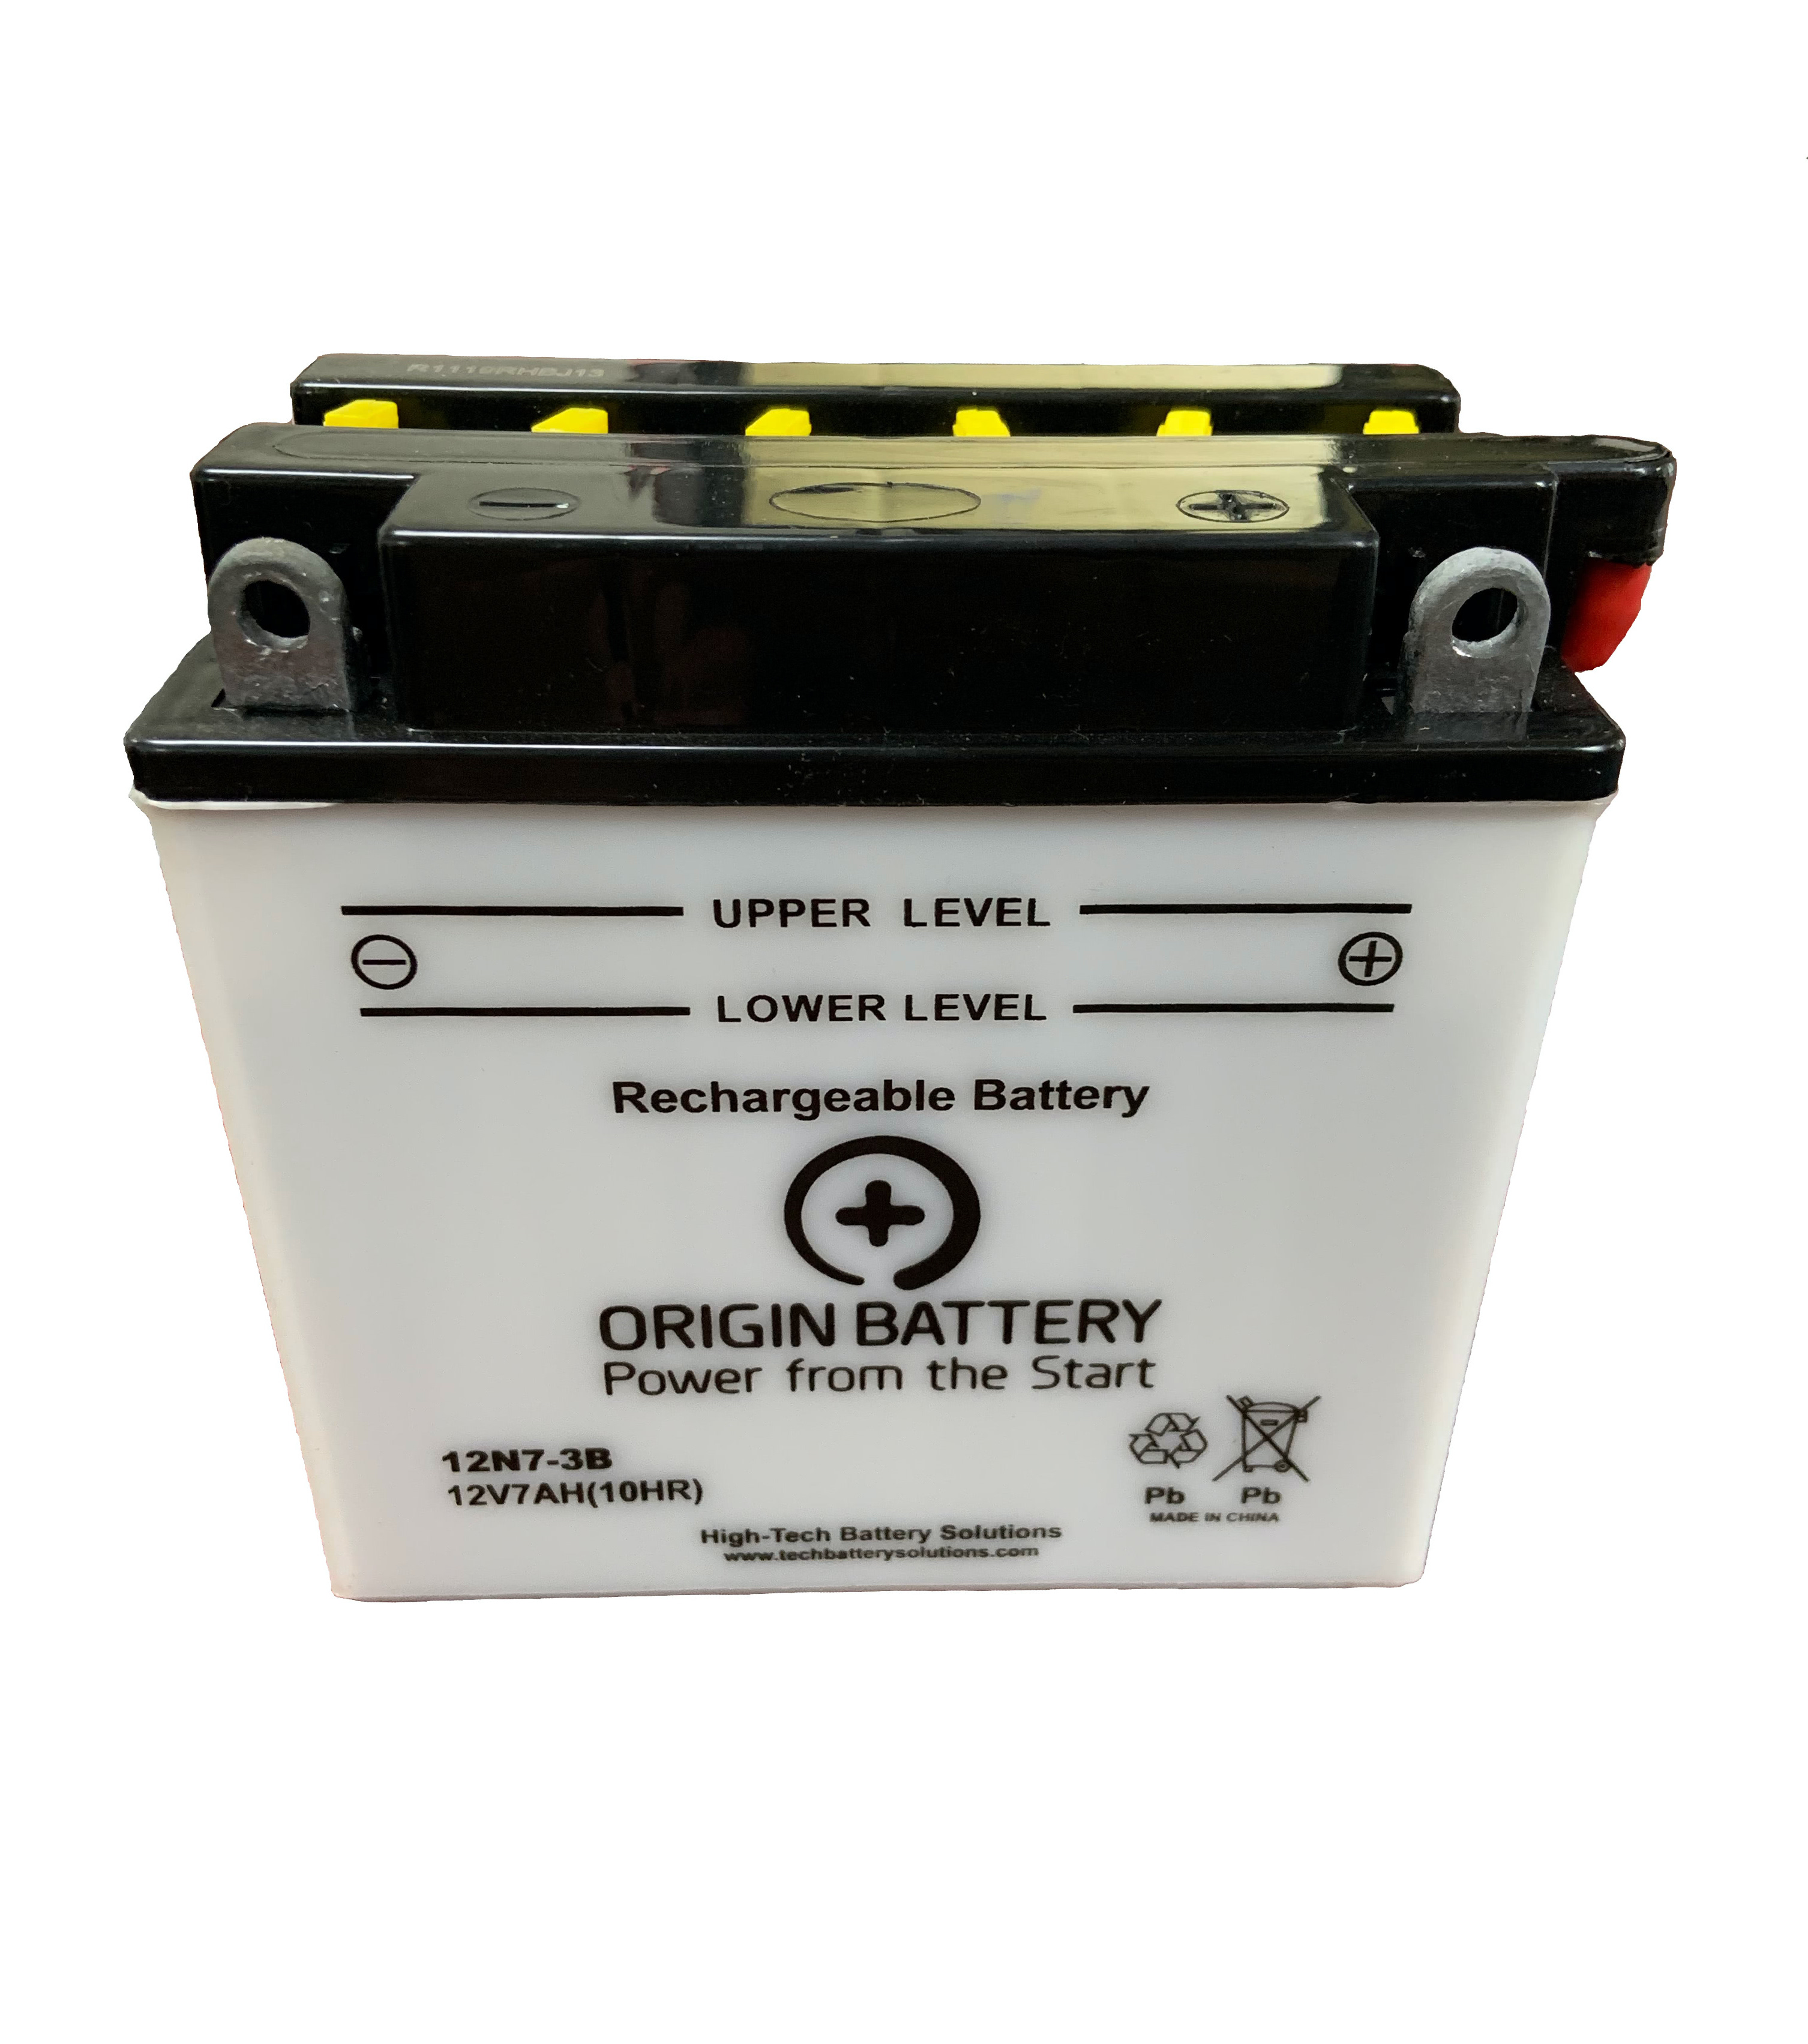 NAPA 740-1881 Battery Replacement Questions & Answers